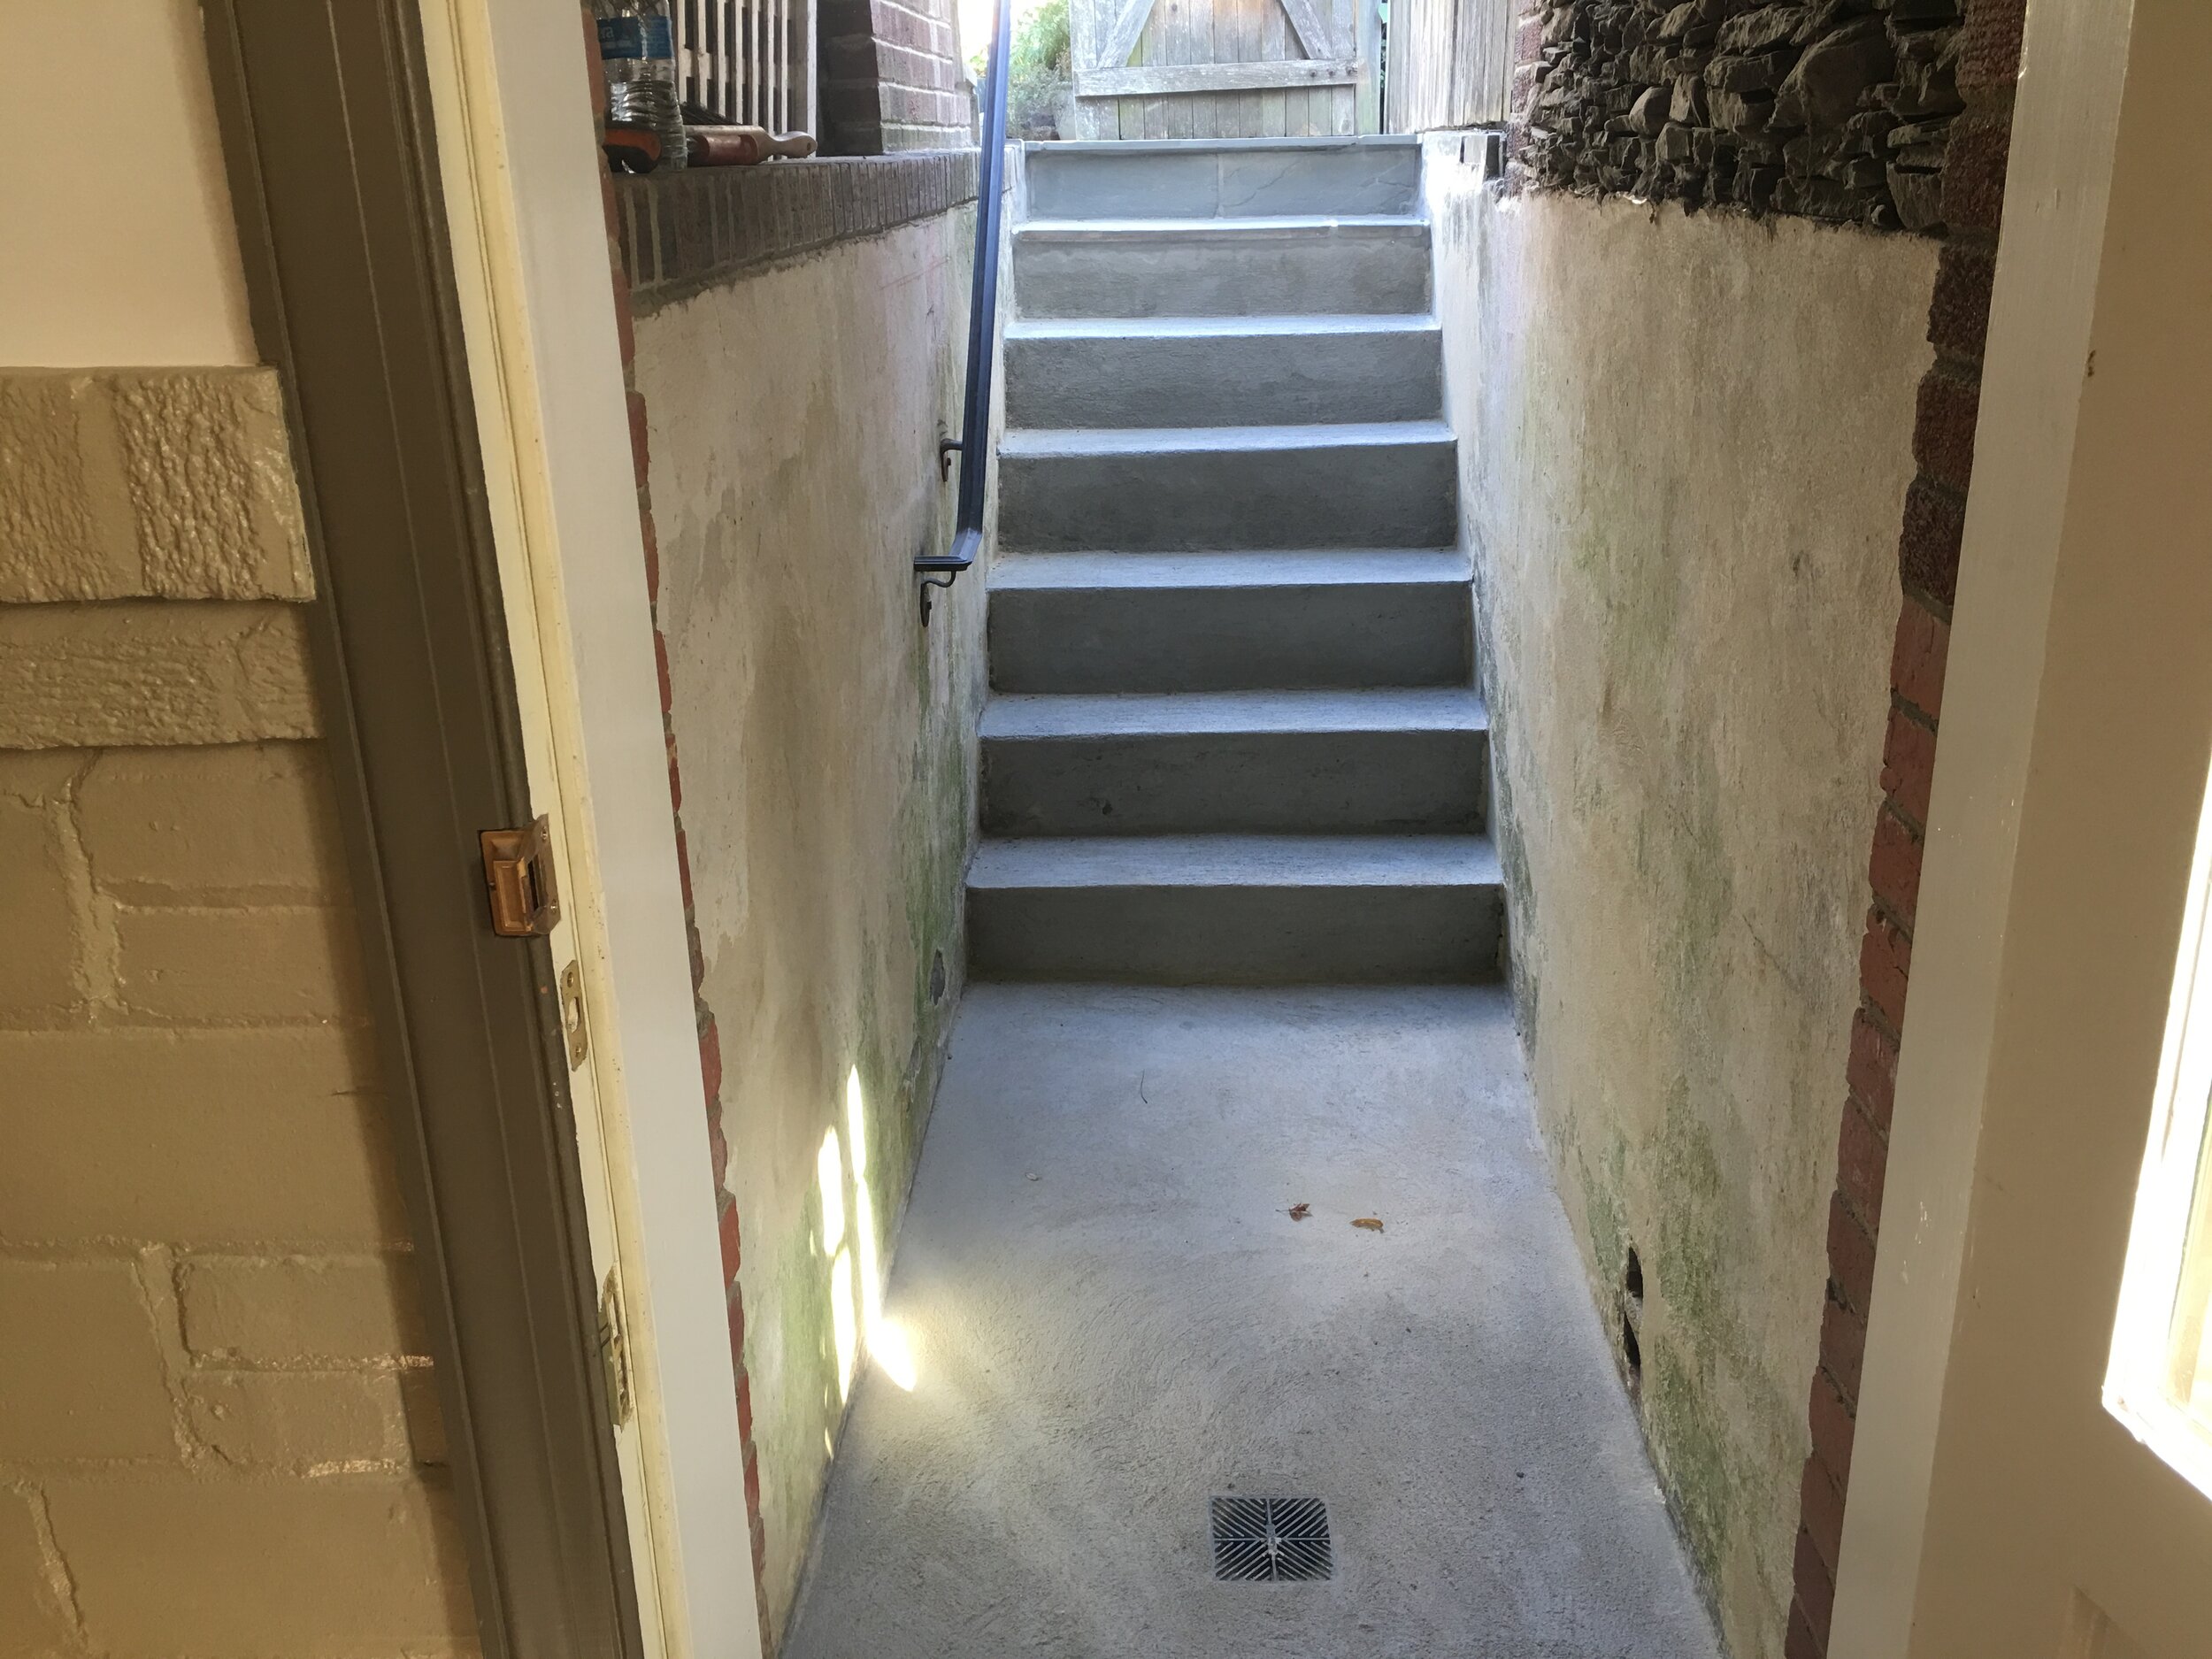  Concrete Basement Entryway Stairs with Drainage System 